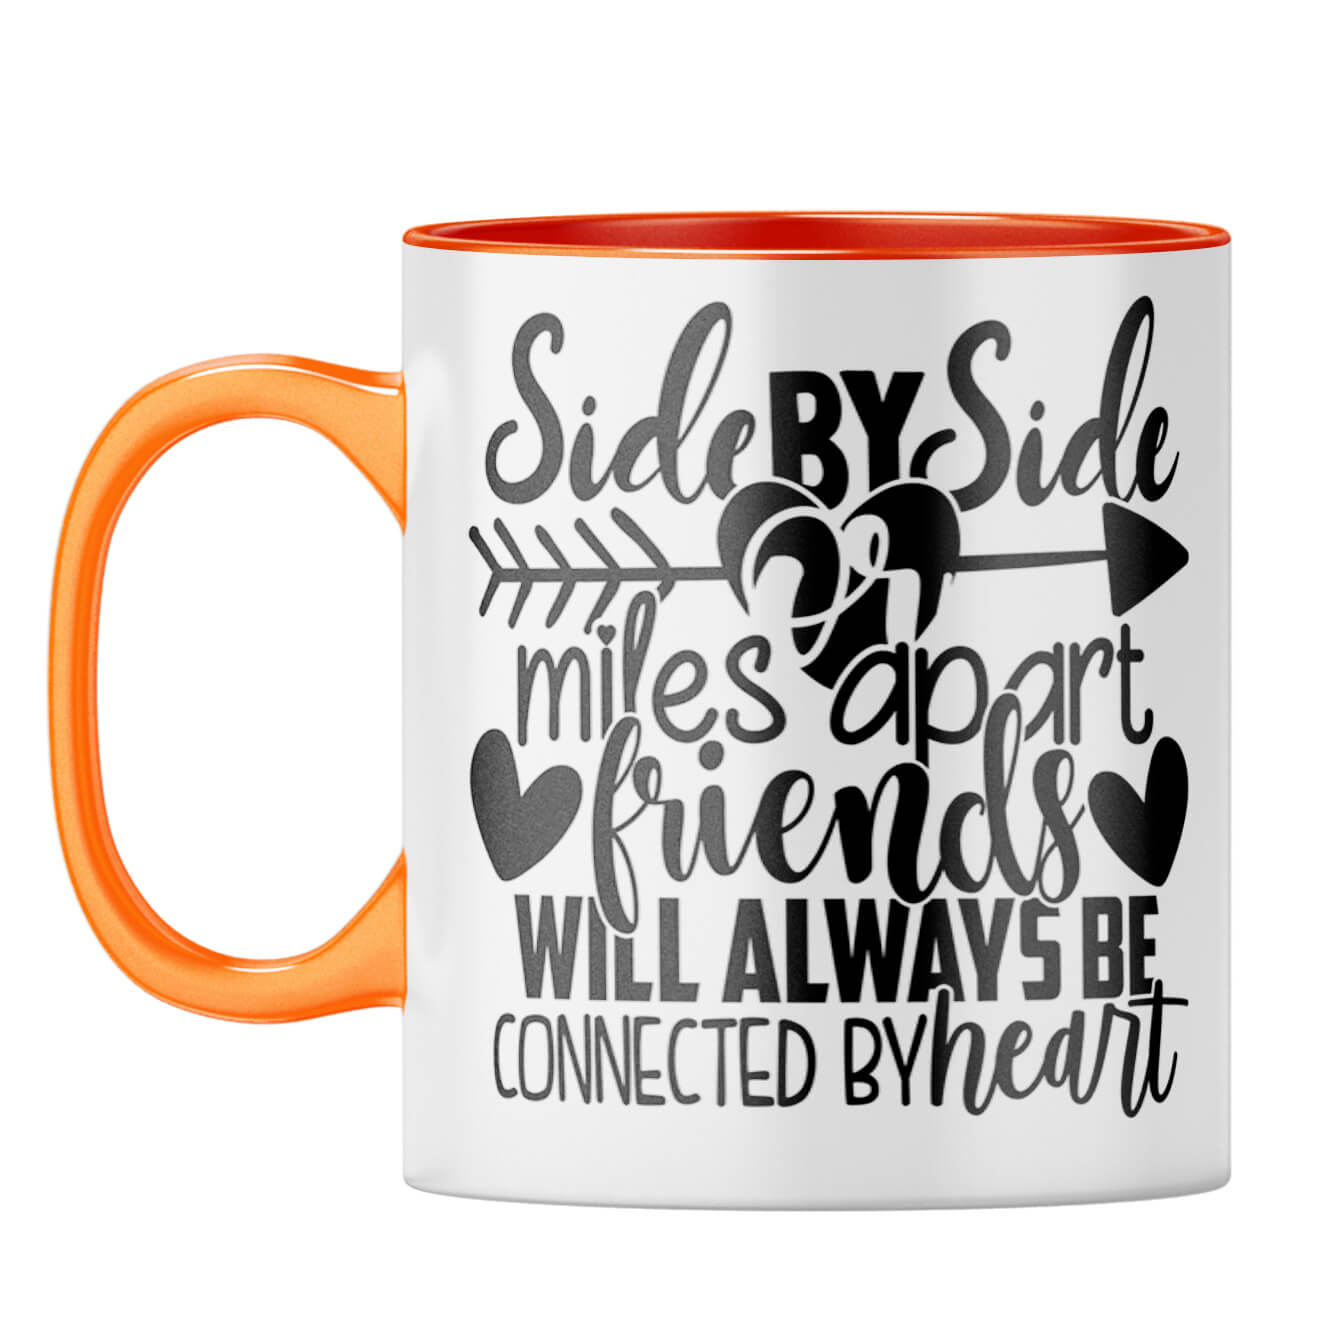 Friends Connected By Heart Coffee Mug Orange